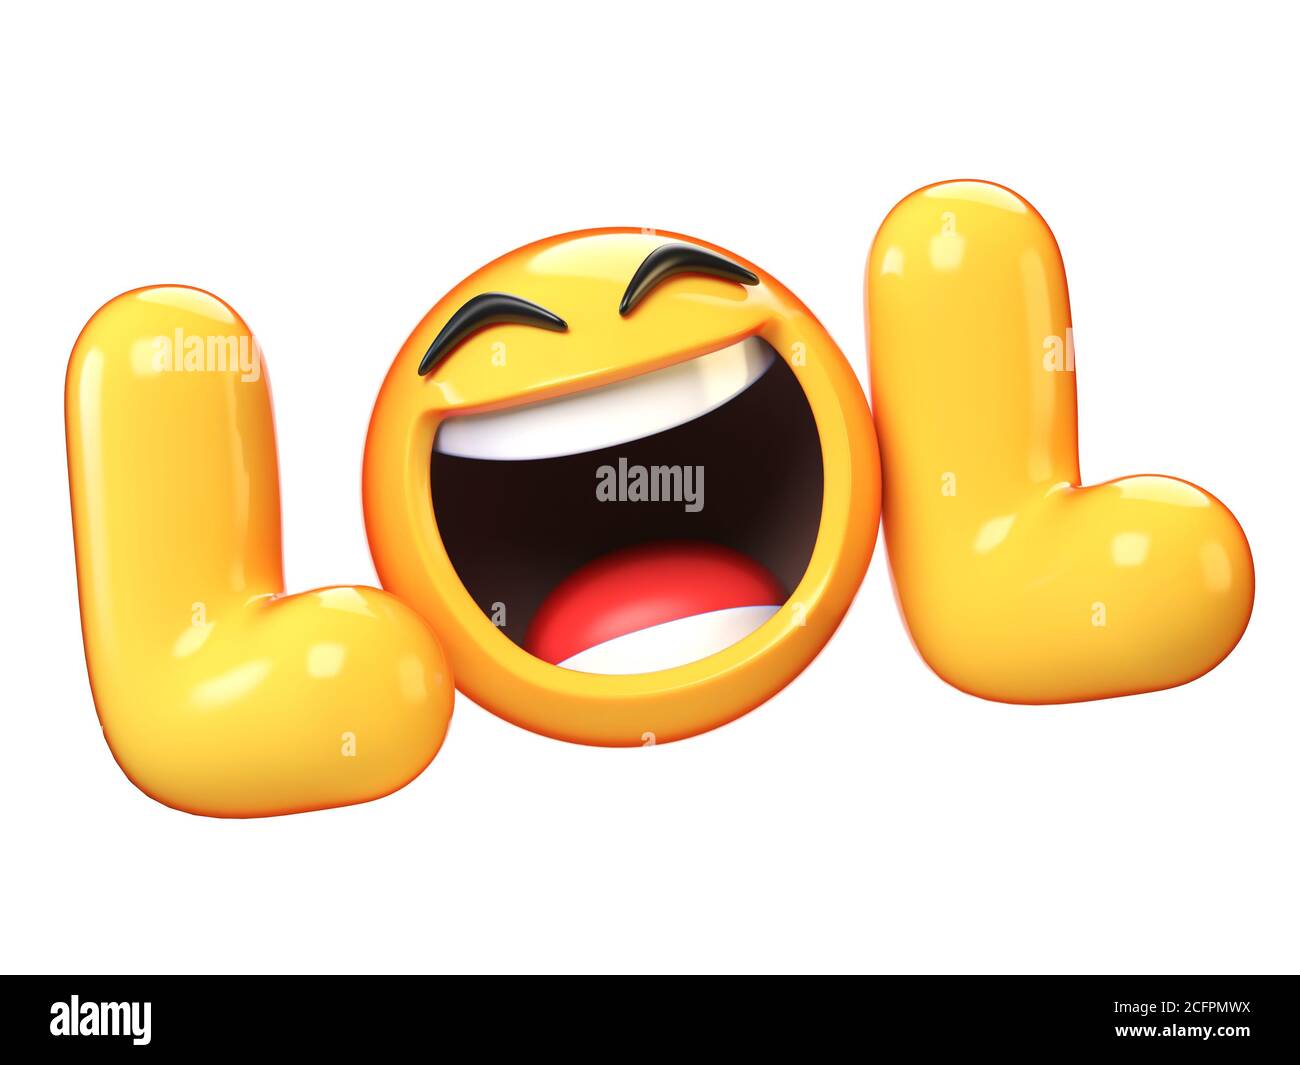 lol-emoji-isolated-on-white-background-laughing-face-emoticon-3d-rendering-2CFPMWX.jpg